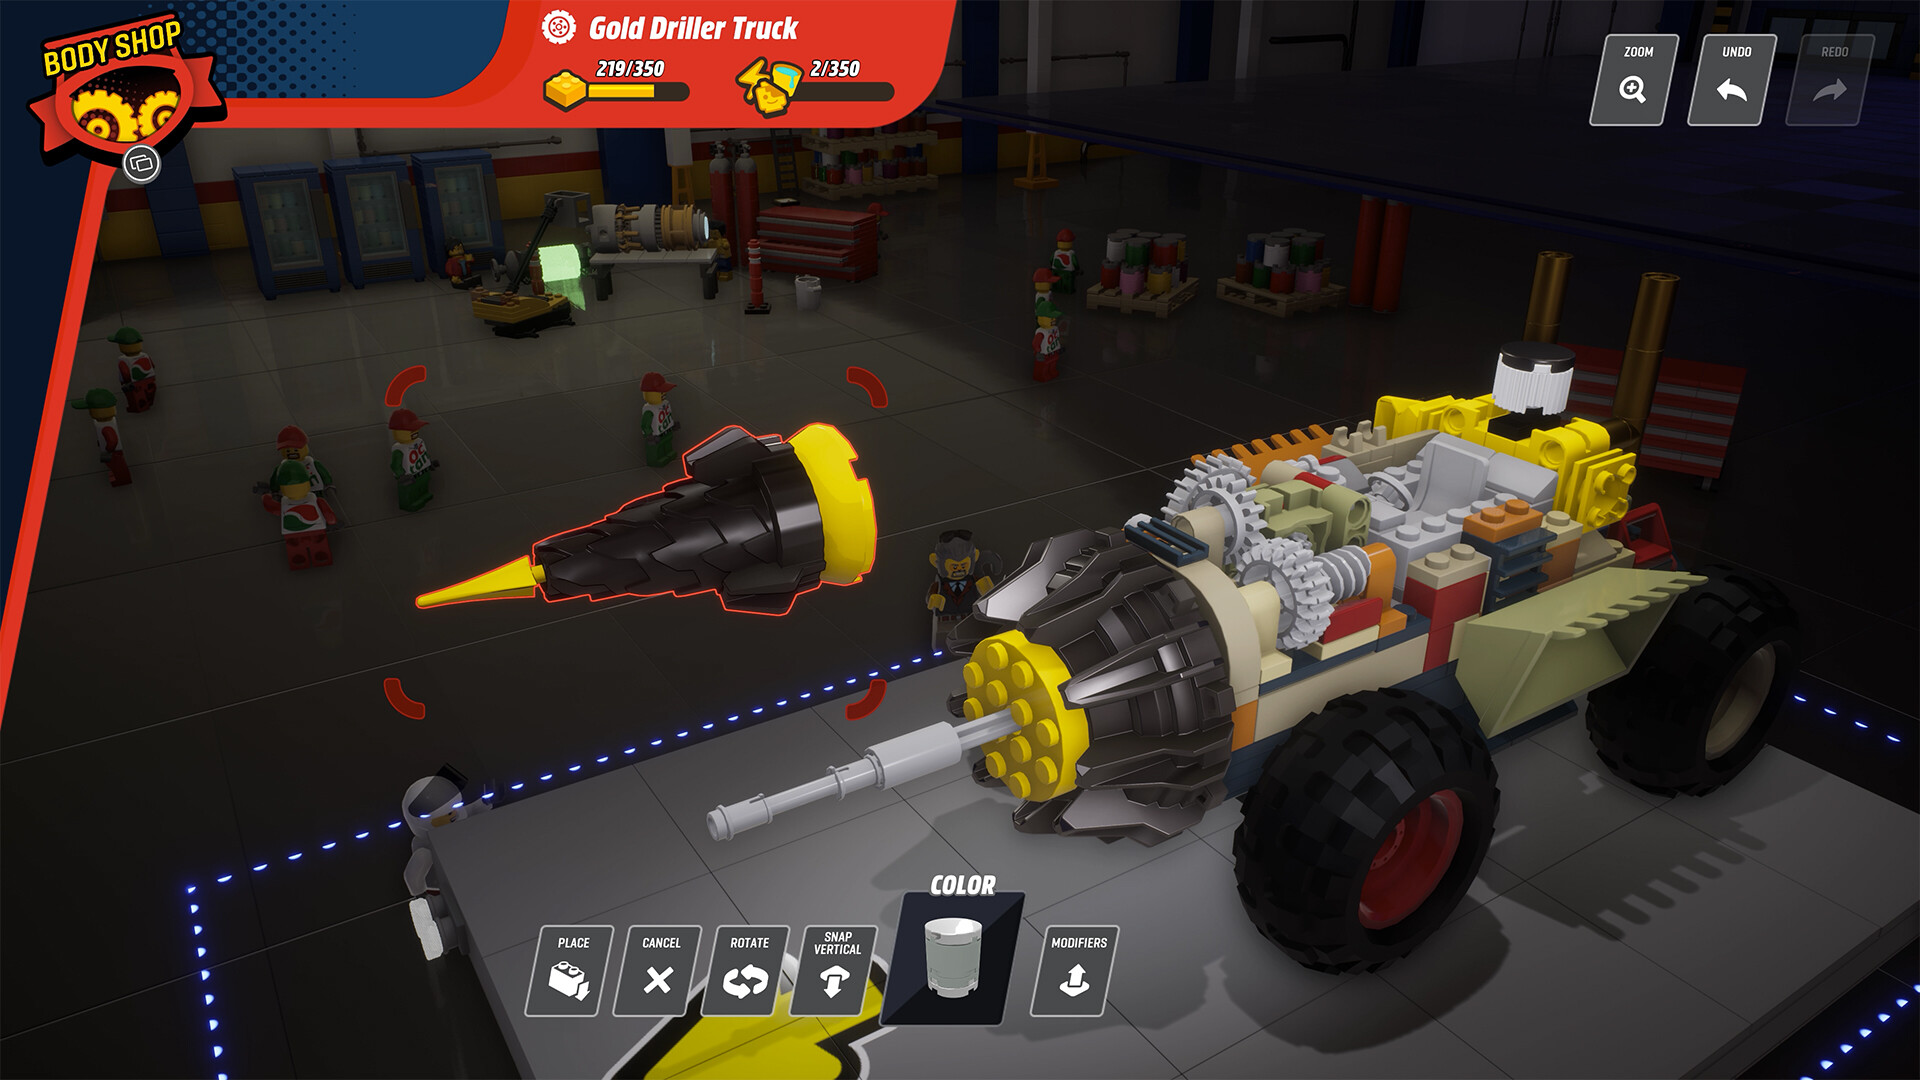 LEGO 2K Drive: Awesome Rivals Edition LATAM Epic Games CD Key